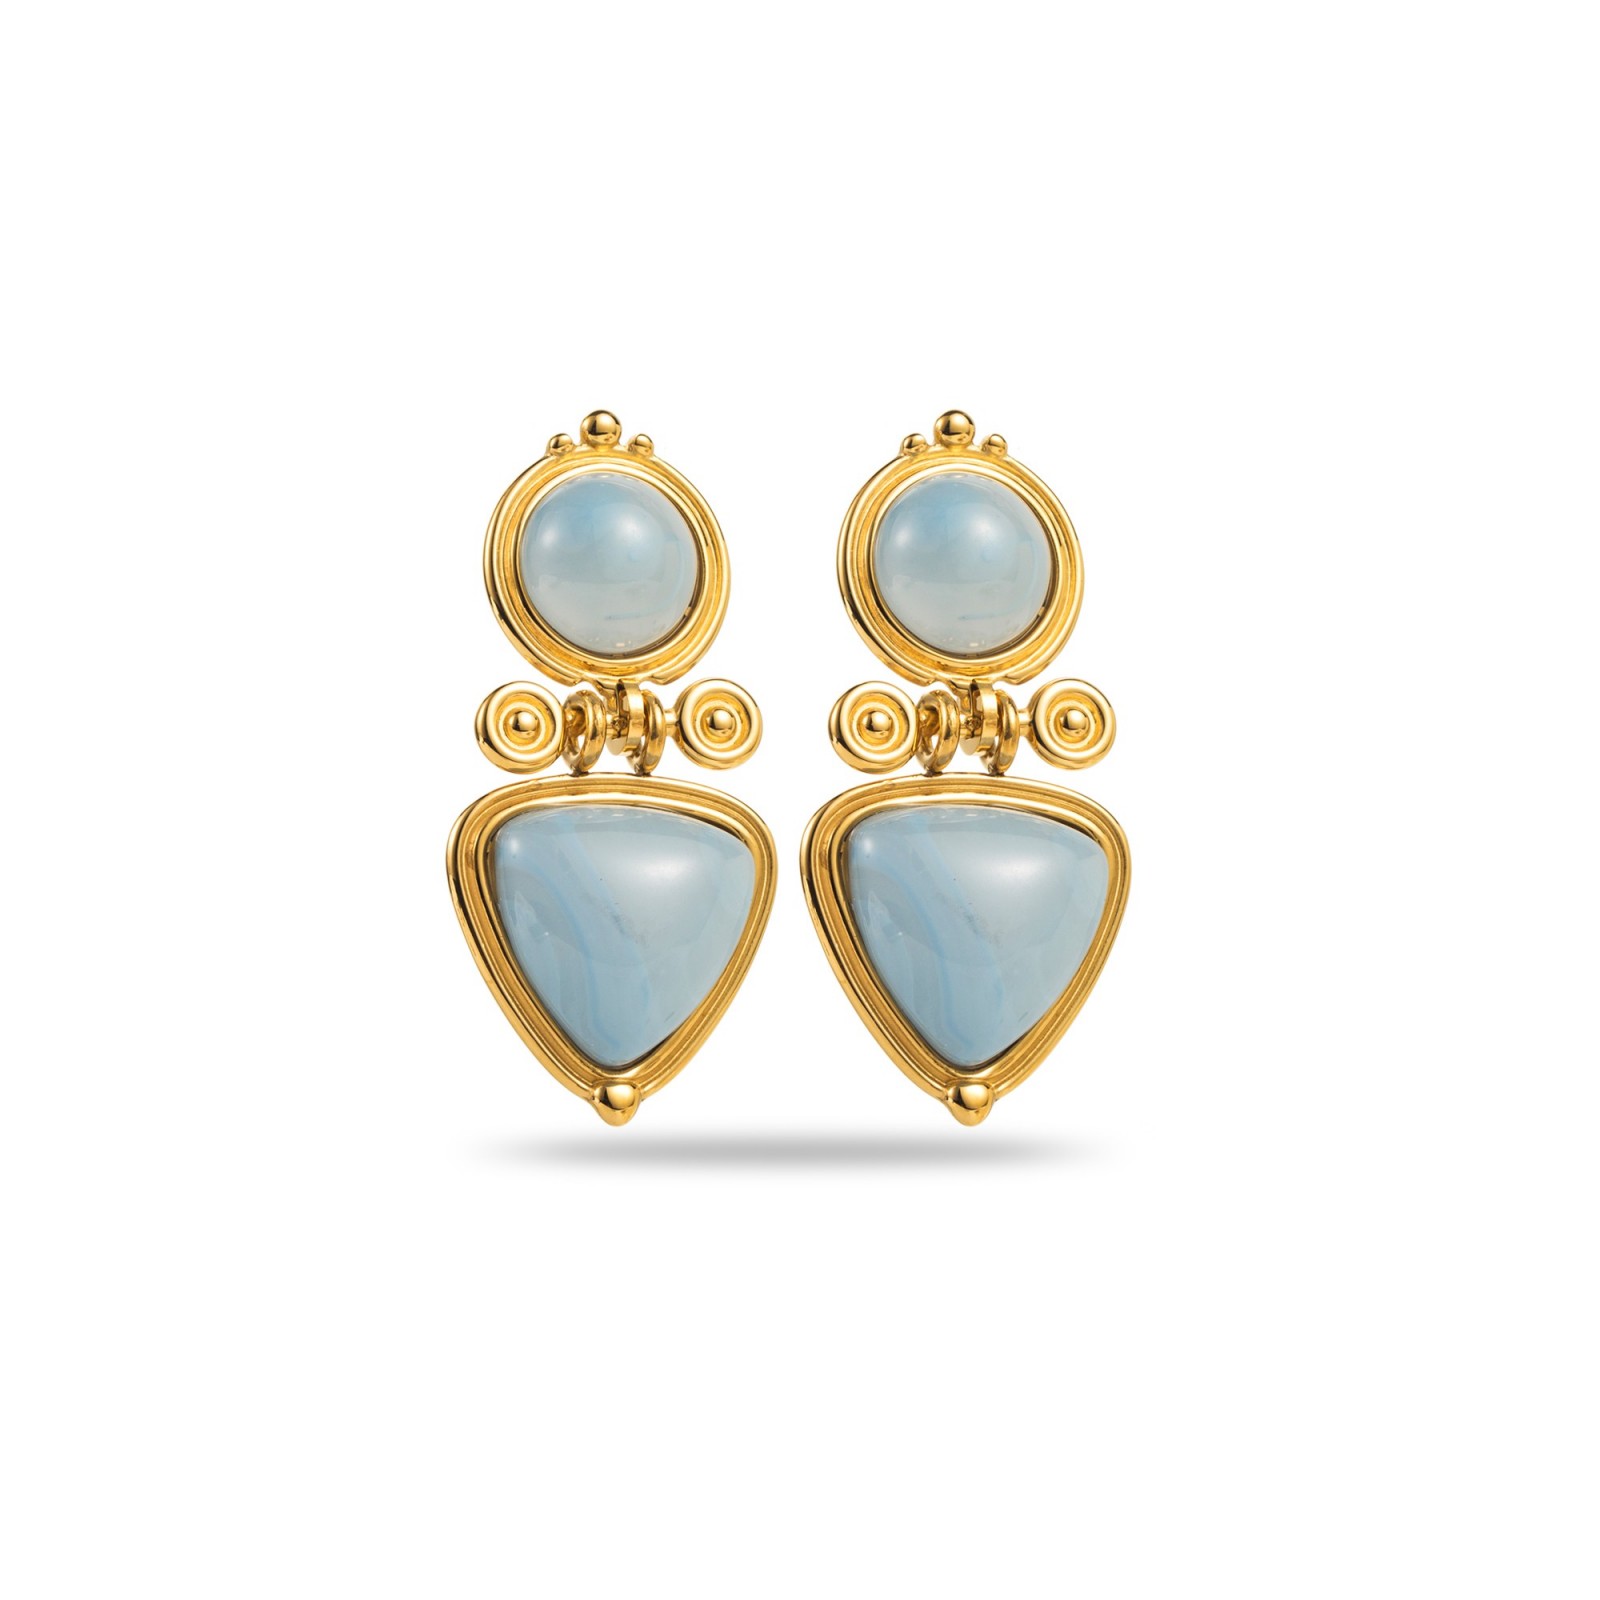 Royal Earrings with Double Studs Color:Blue